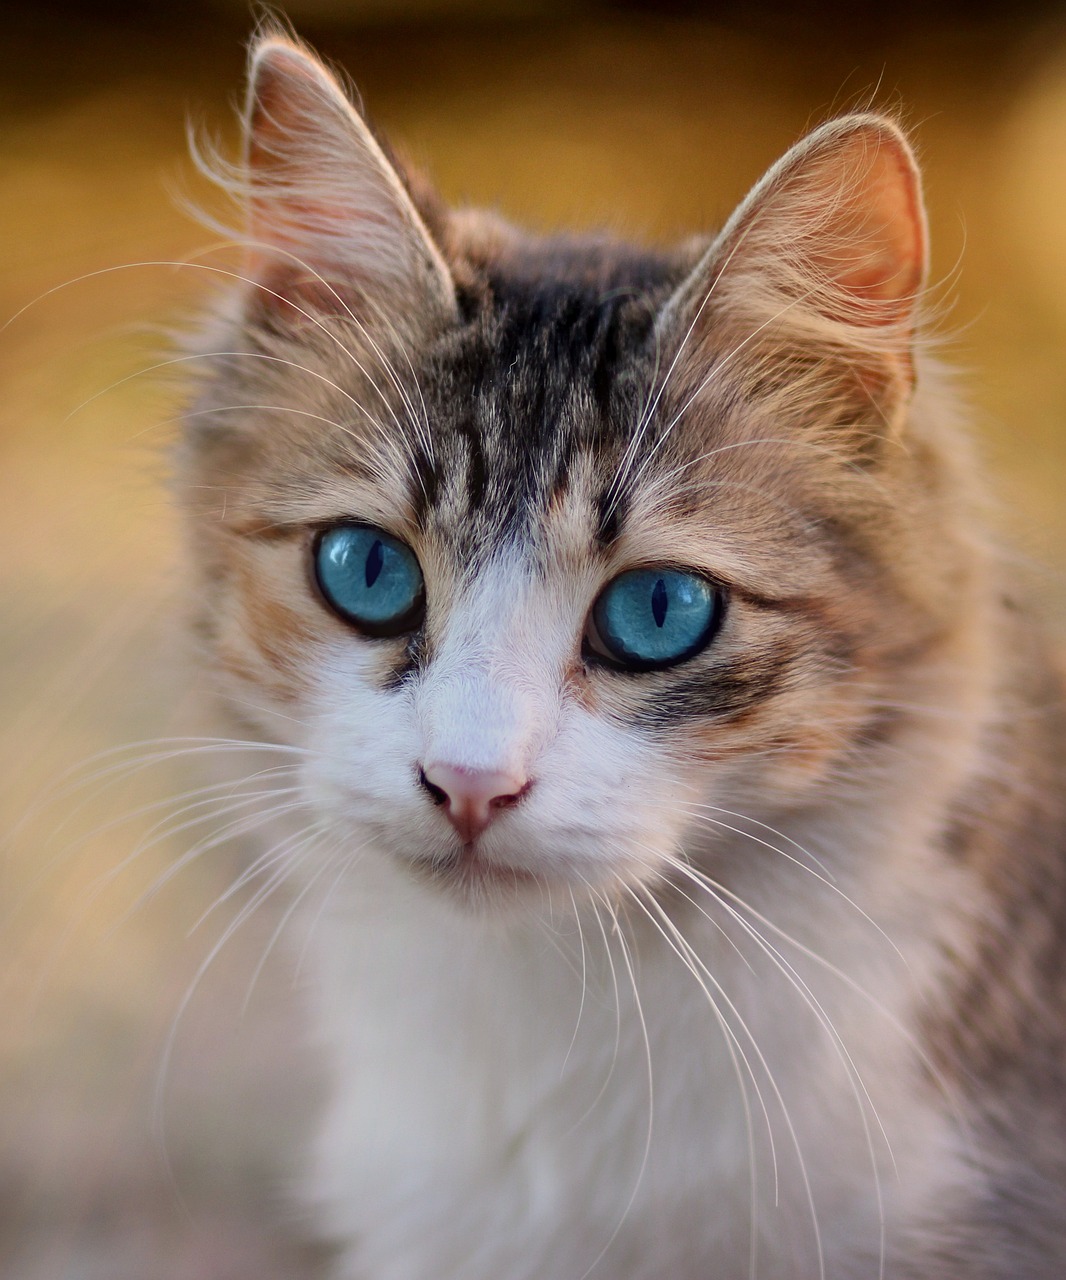 Lymphoma in Cats: All you need to know